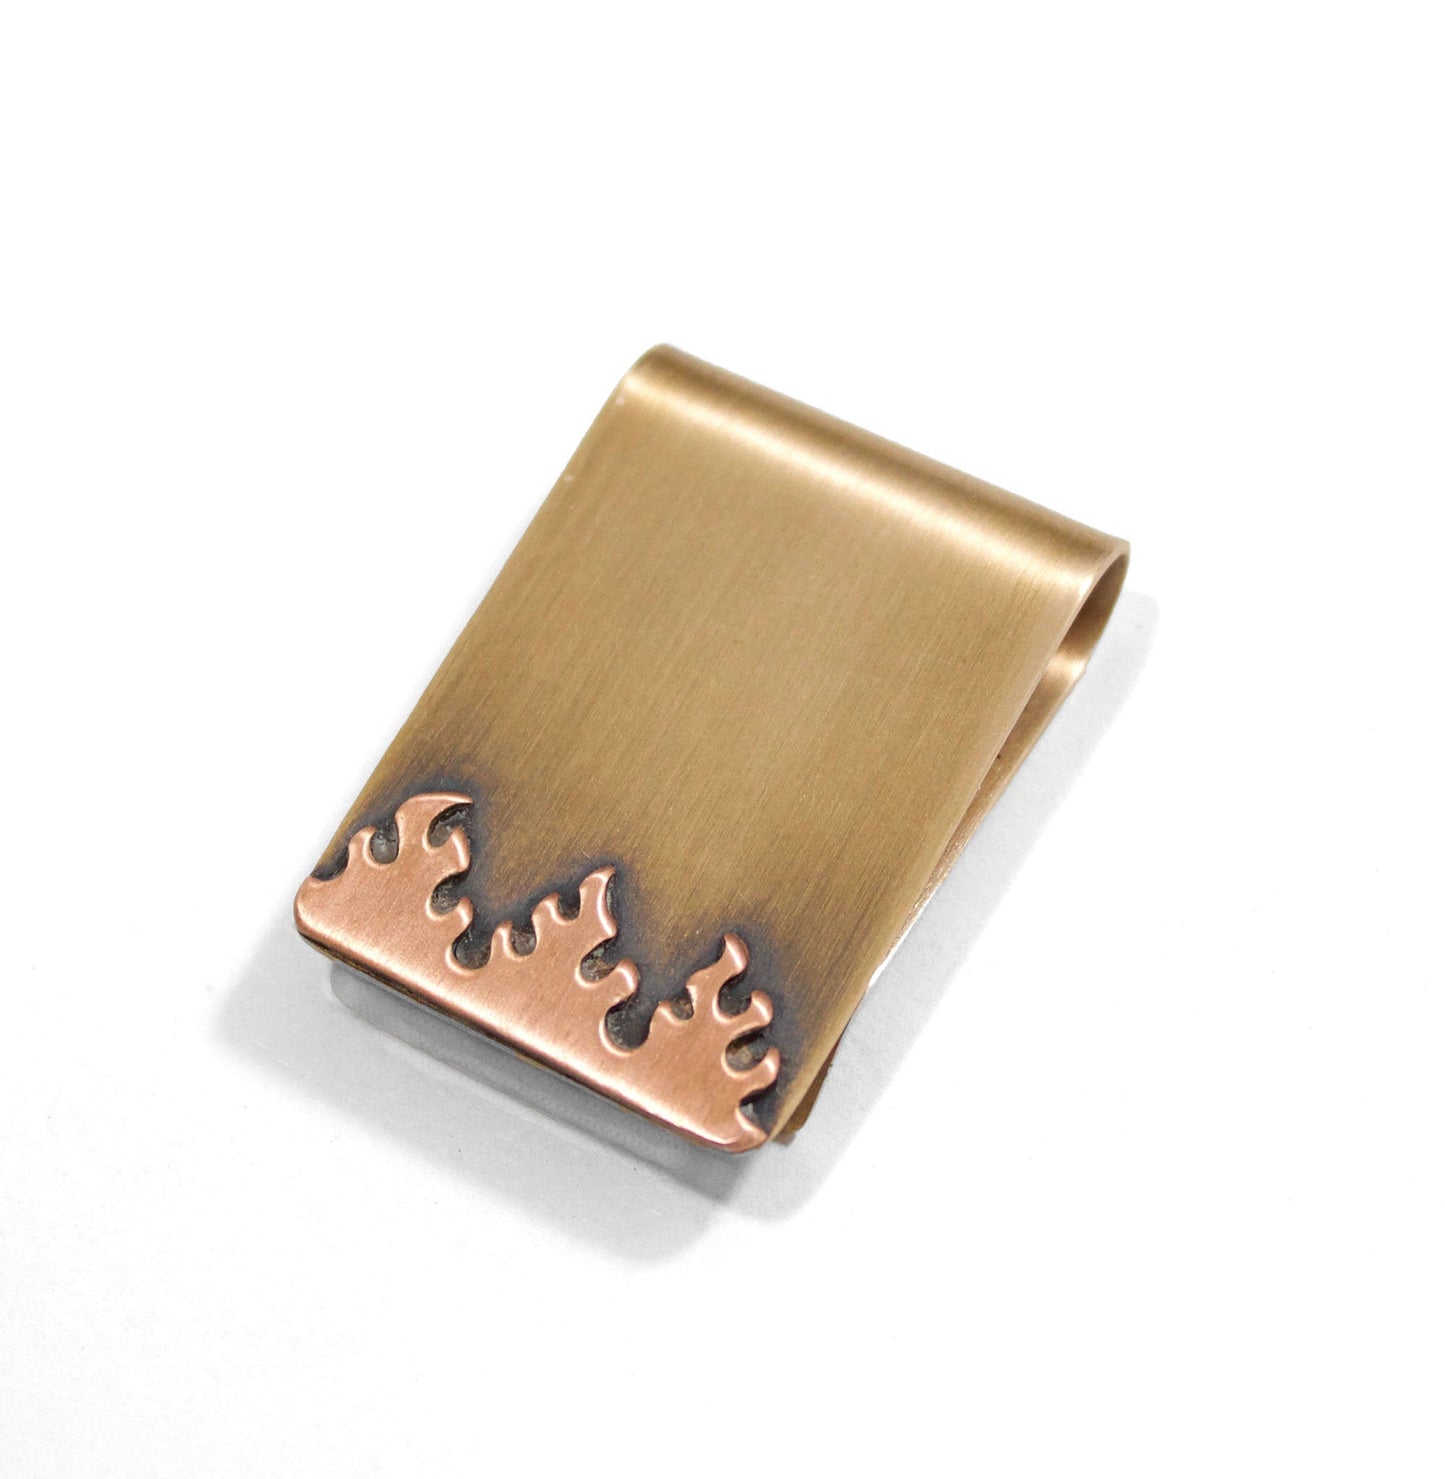 Flames Money Clip in Bronze and Copper